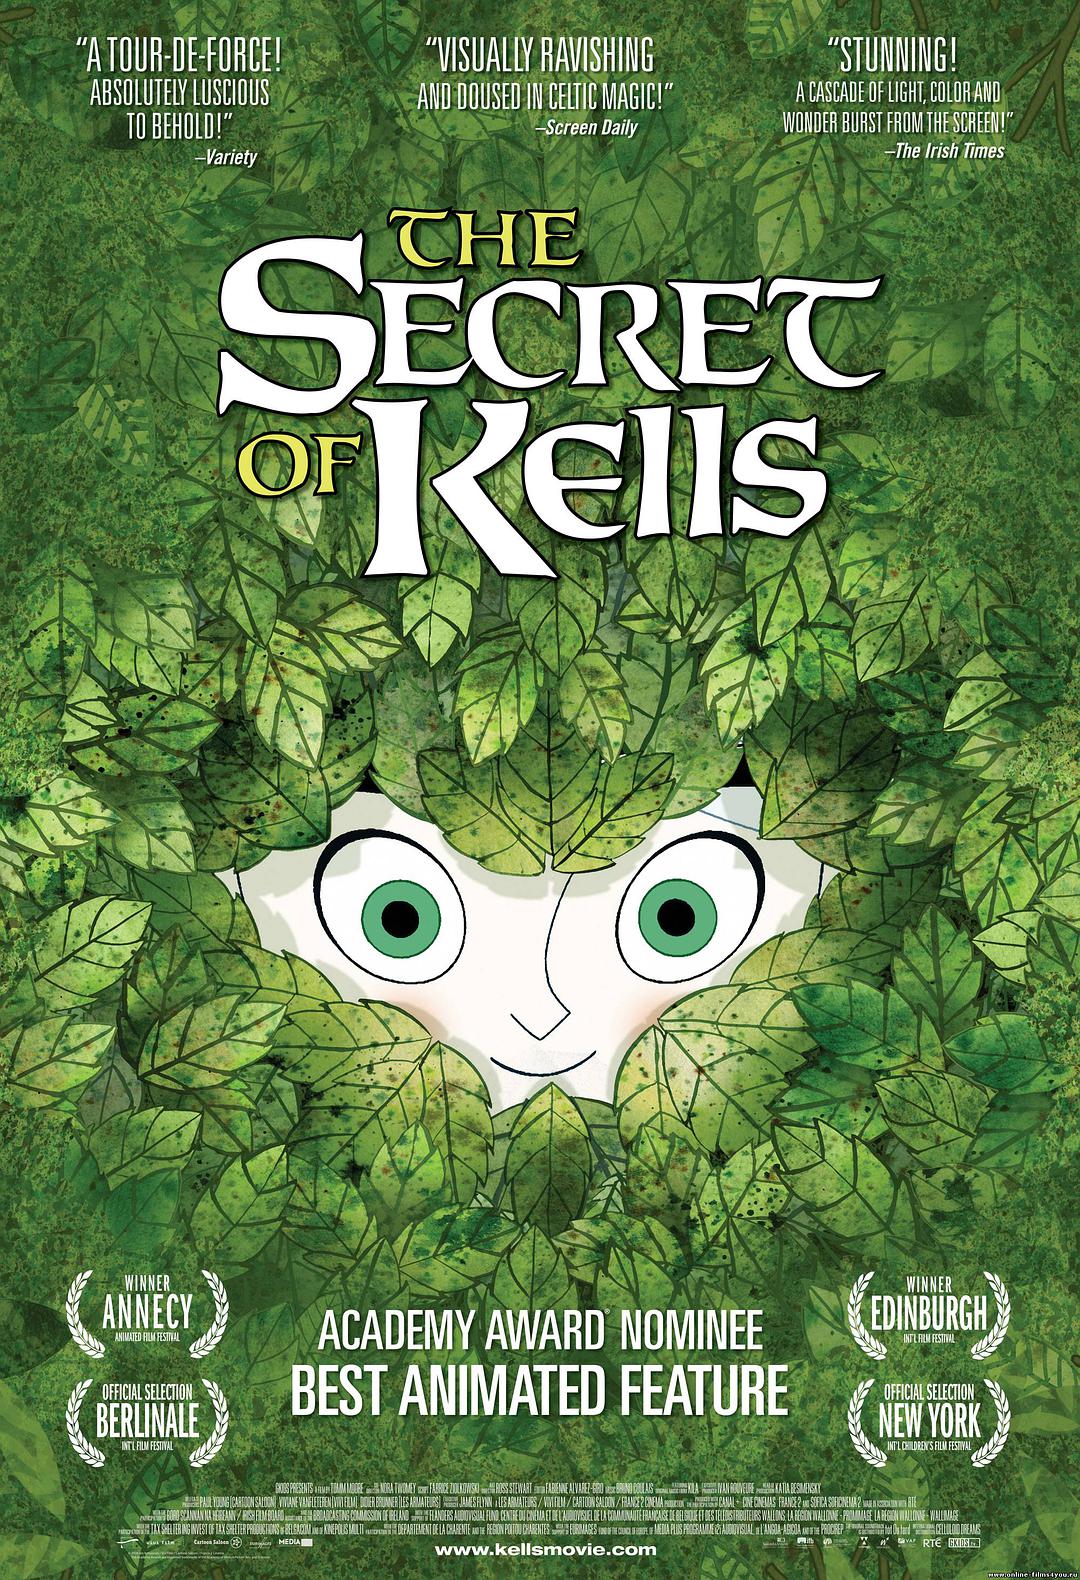  The.Secret.of.Kells.2009.LIMITED.1080p.BluRay.x264-AMIABLE 4.41GB-1.png